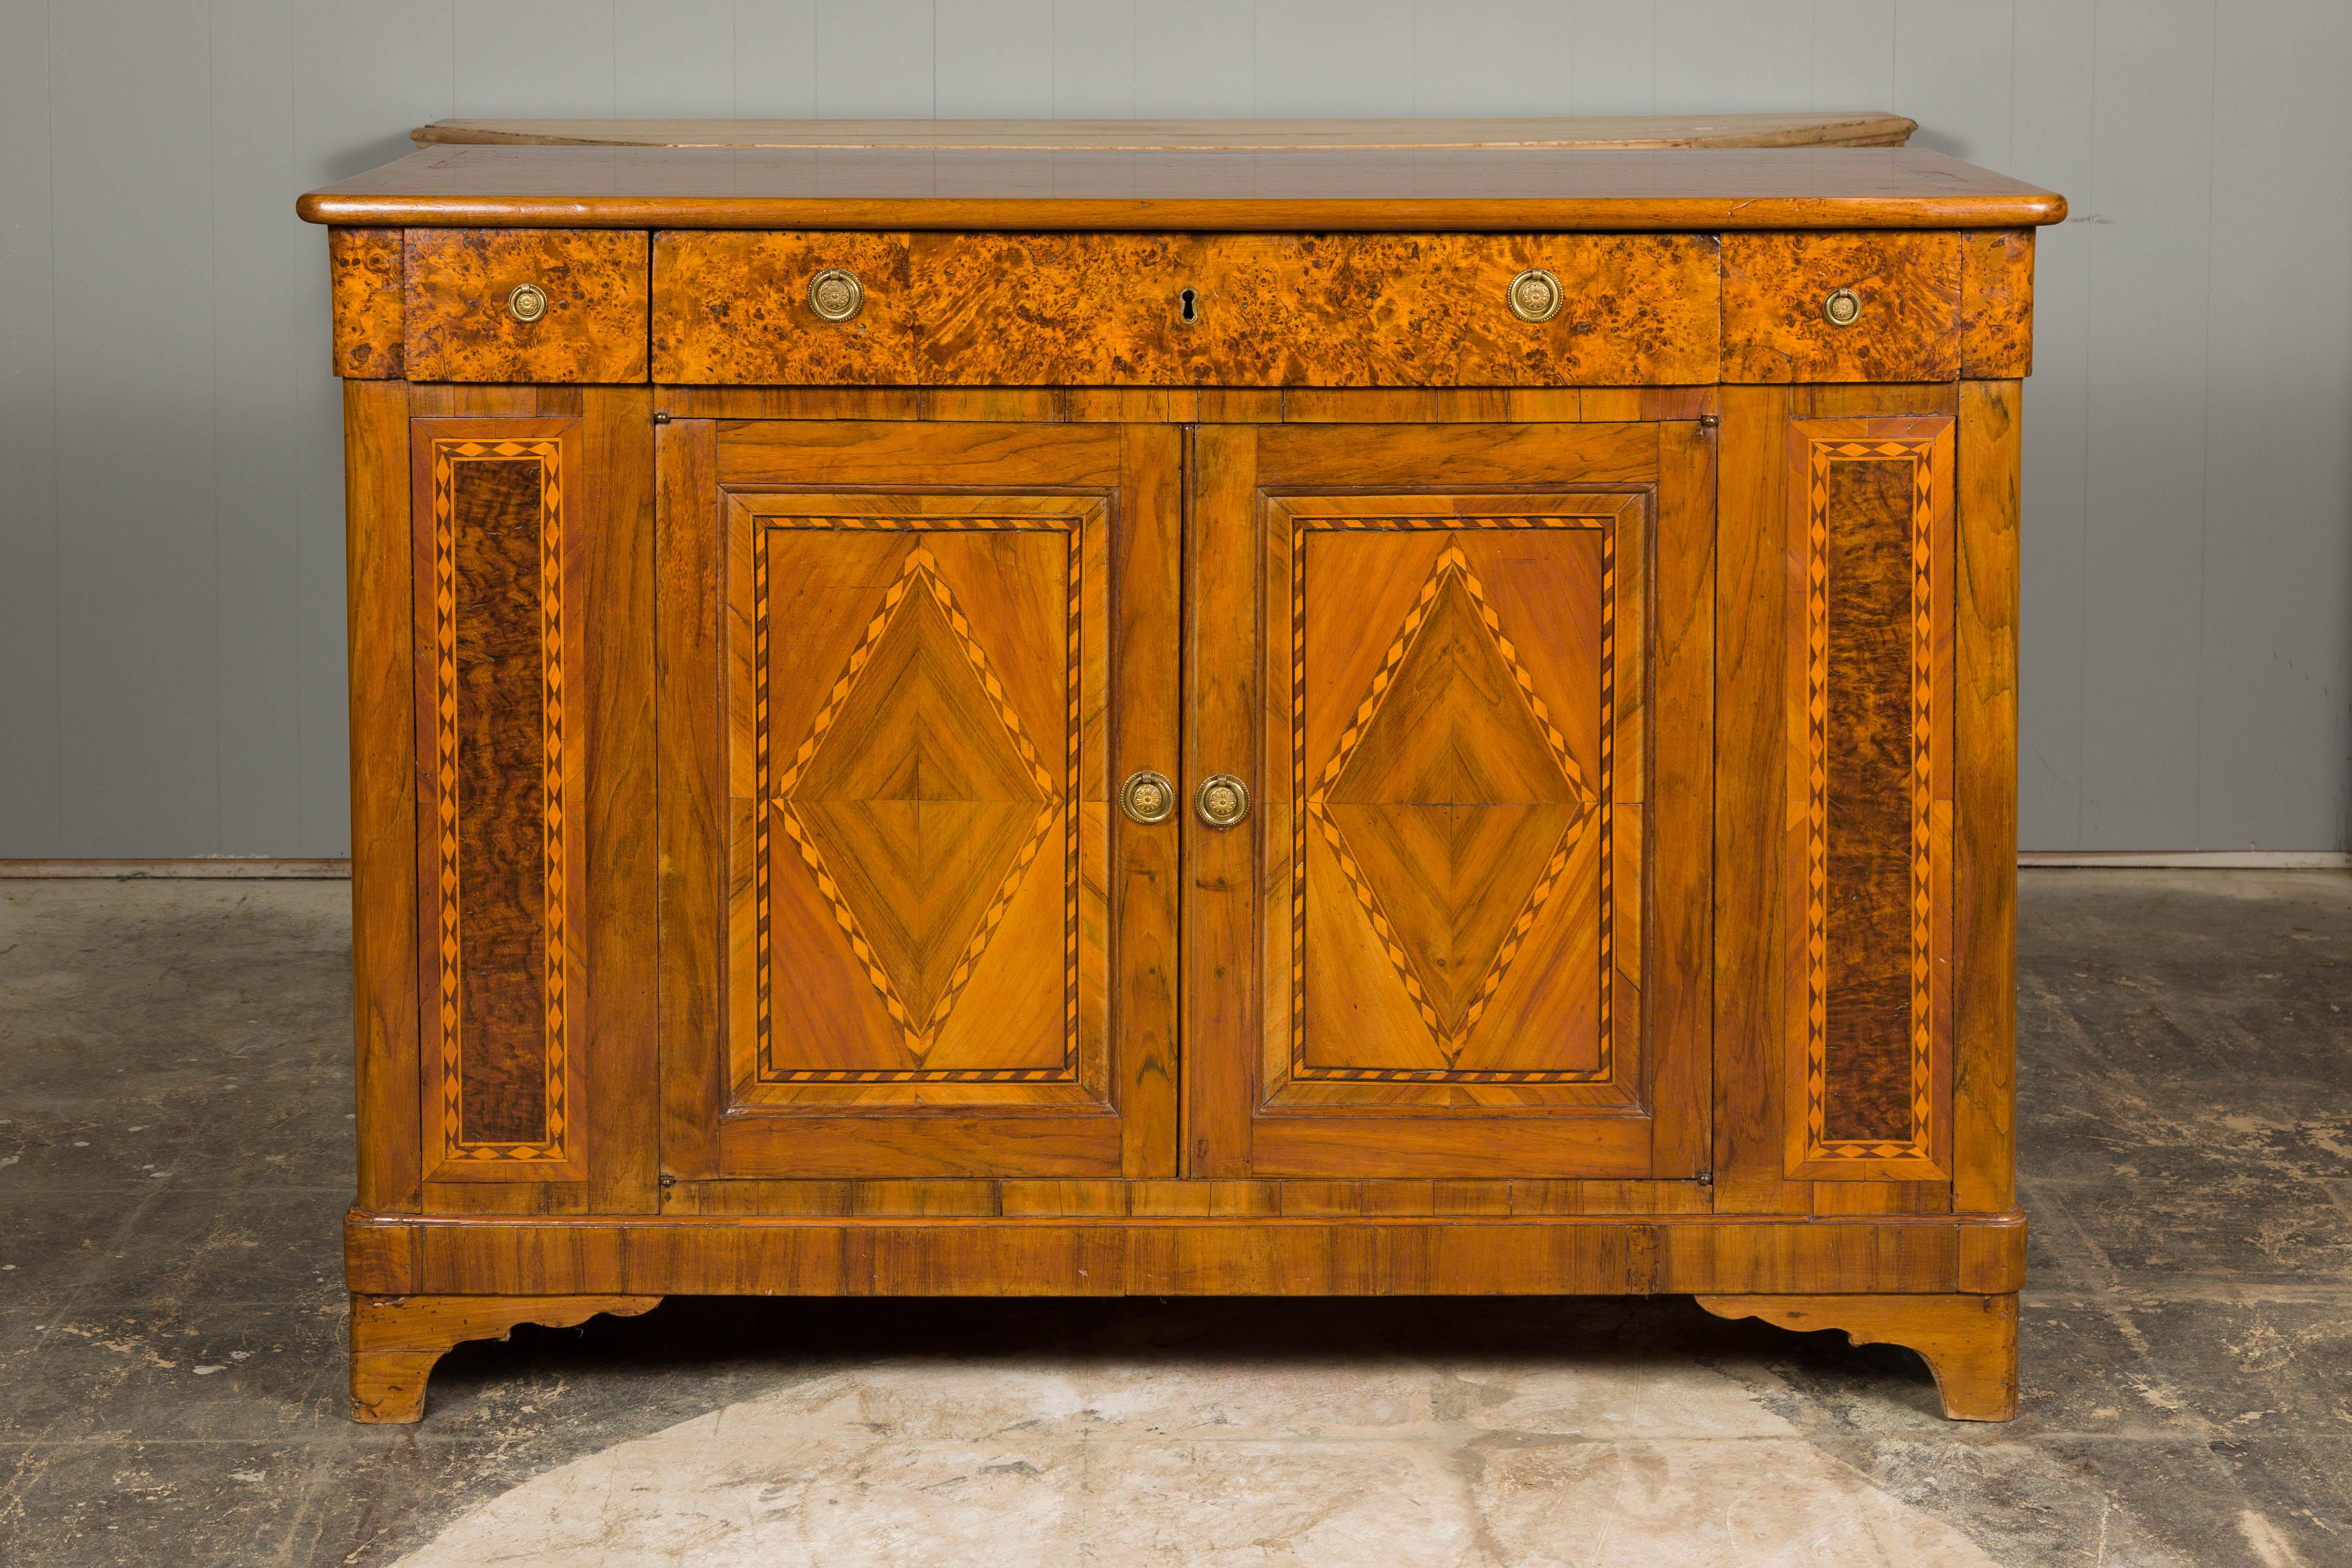 A French walnut buffet from the 19th century with burled accents, doors inlaid with diamond motifs and ogee bracket feet. Embrace the exquisite charm of this French 19th-century walnut buffet, a masterpiece of craftsmanship that marries function